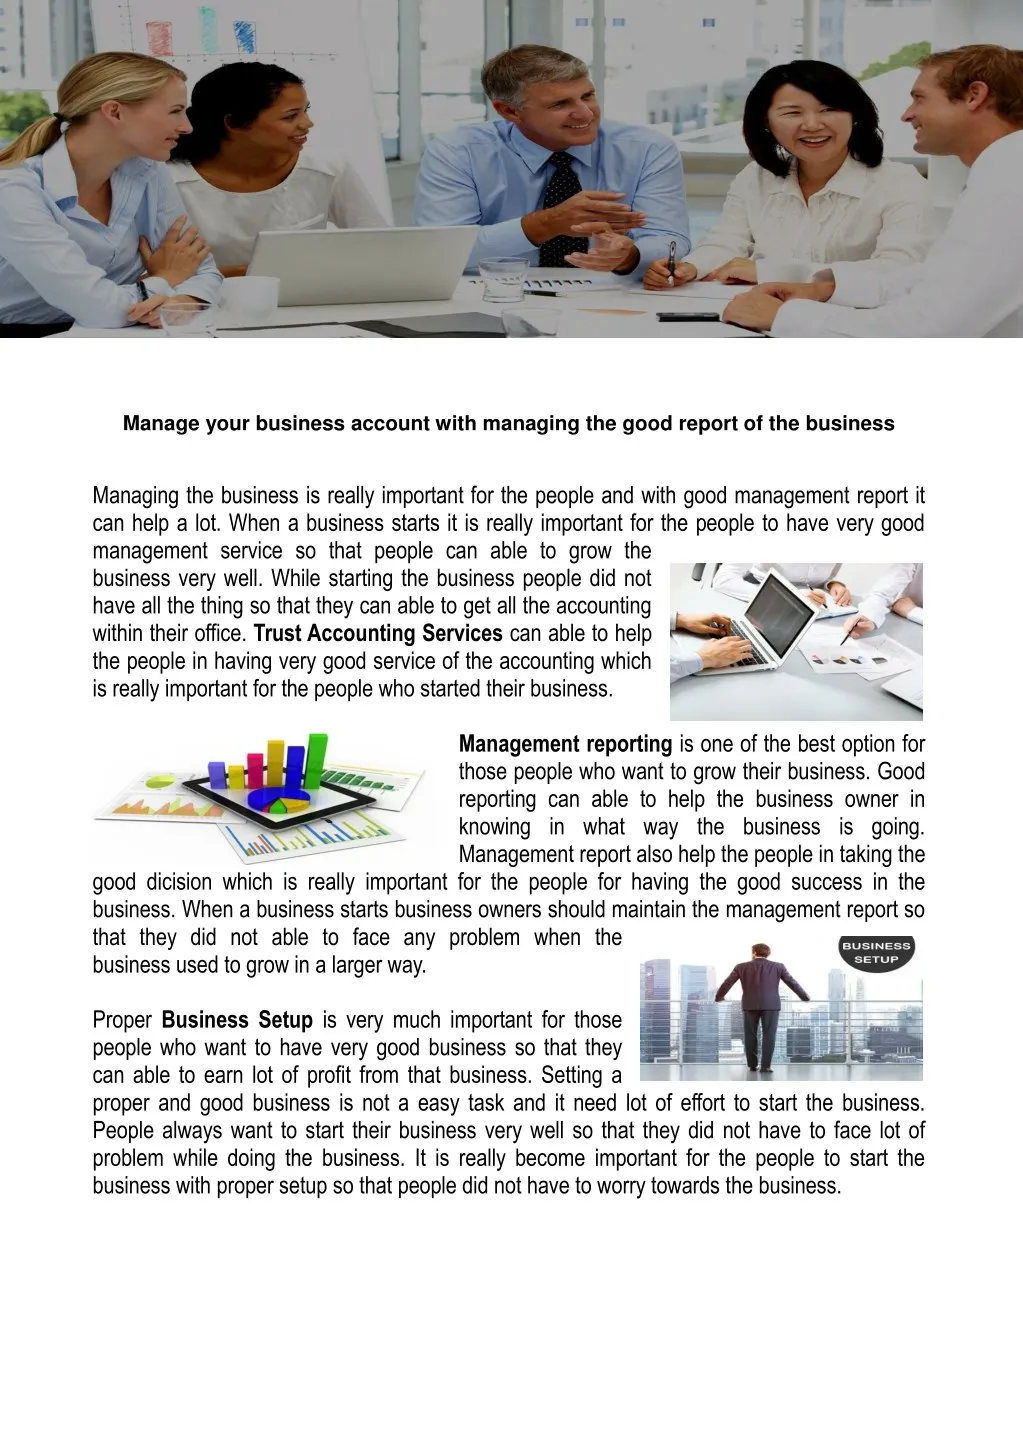 manage your business account with managing